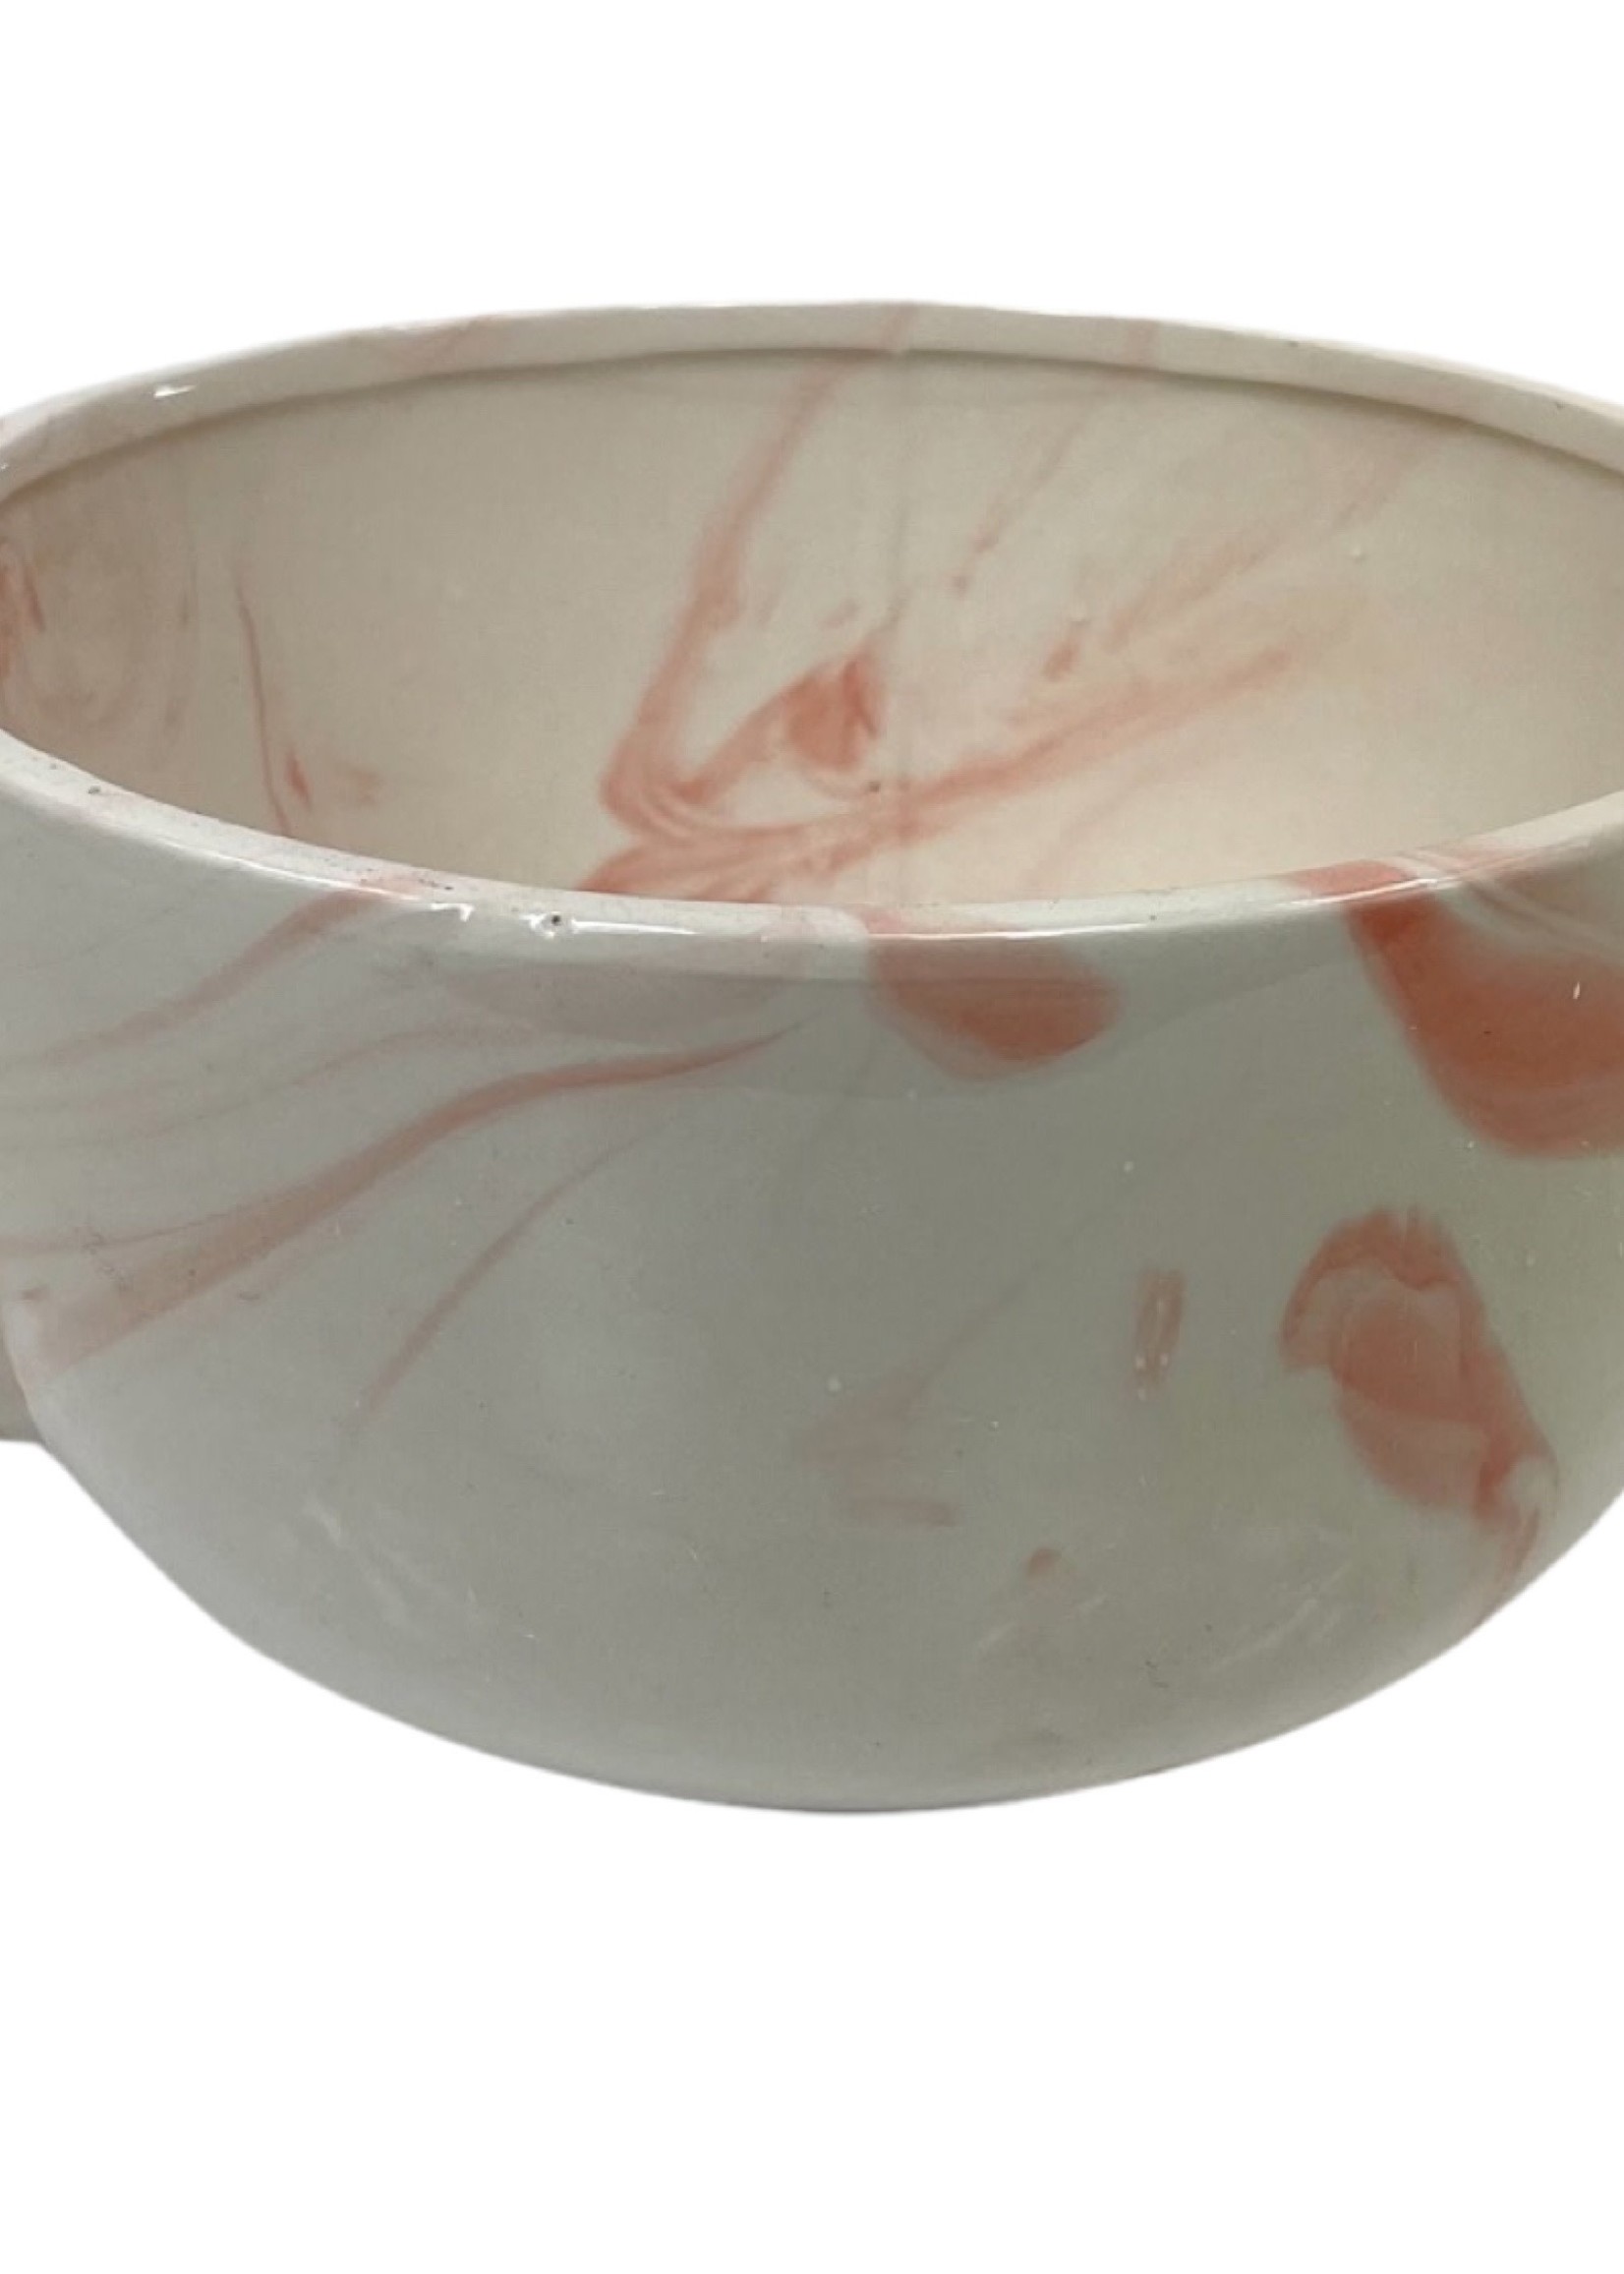 Marbled Tea Cup Planter Pink 8 inch